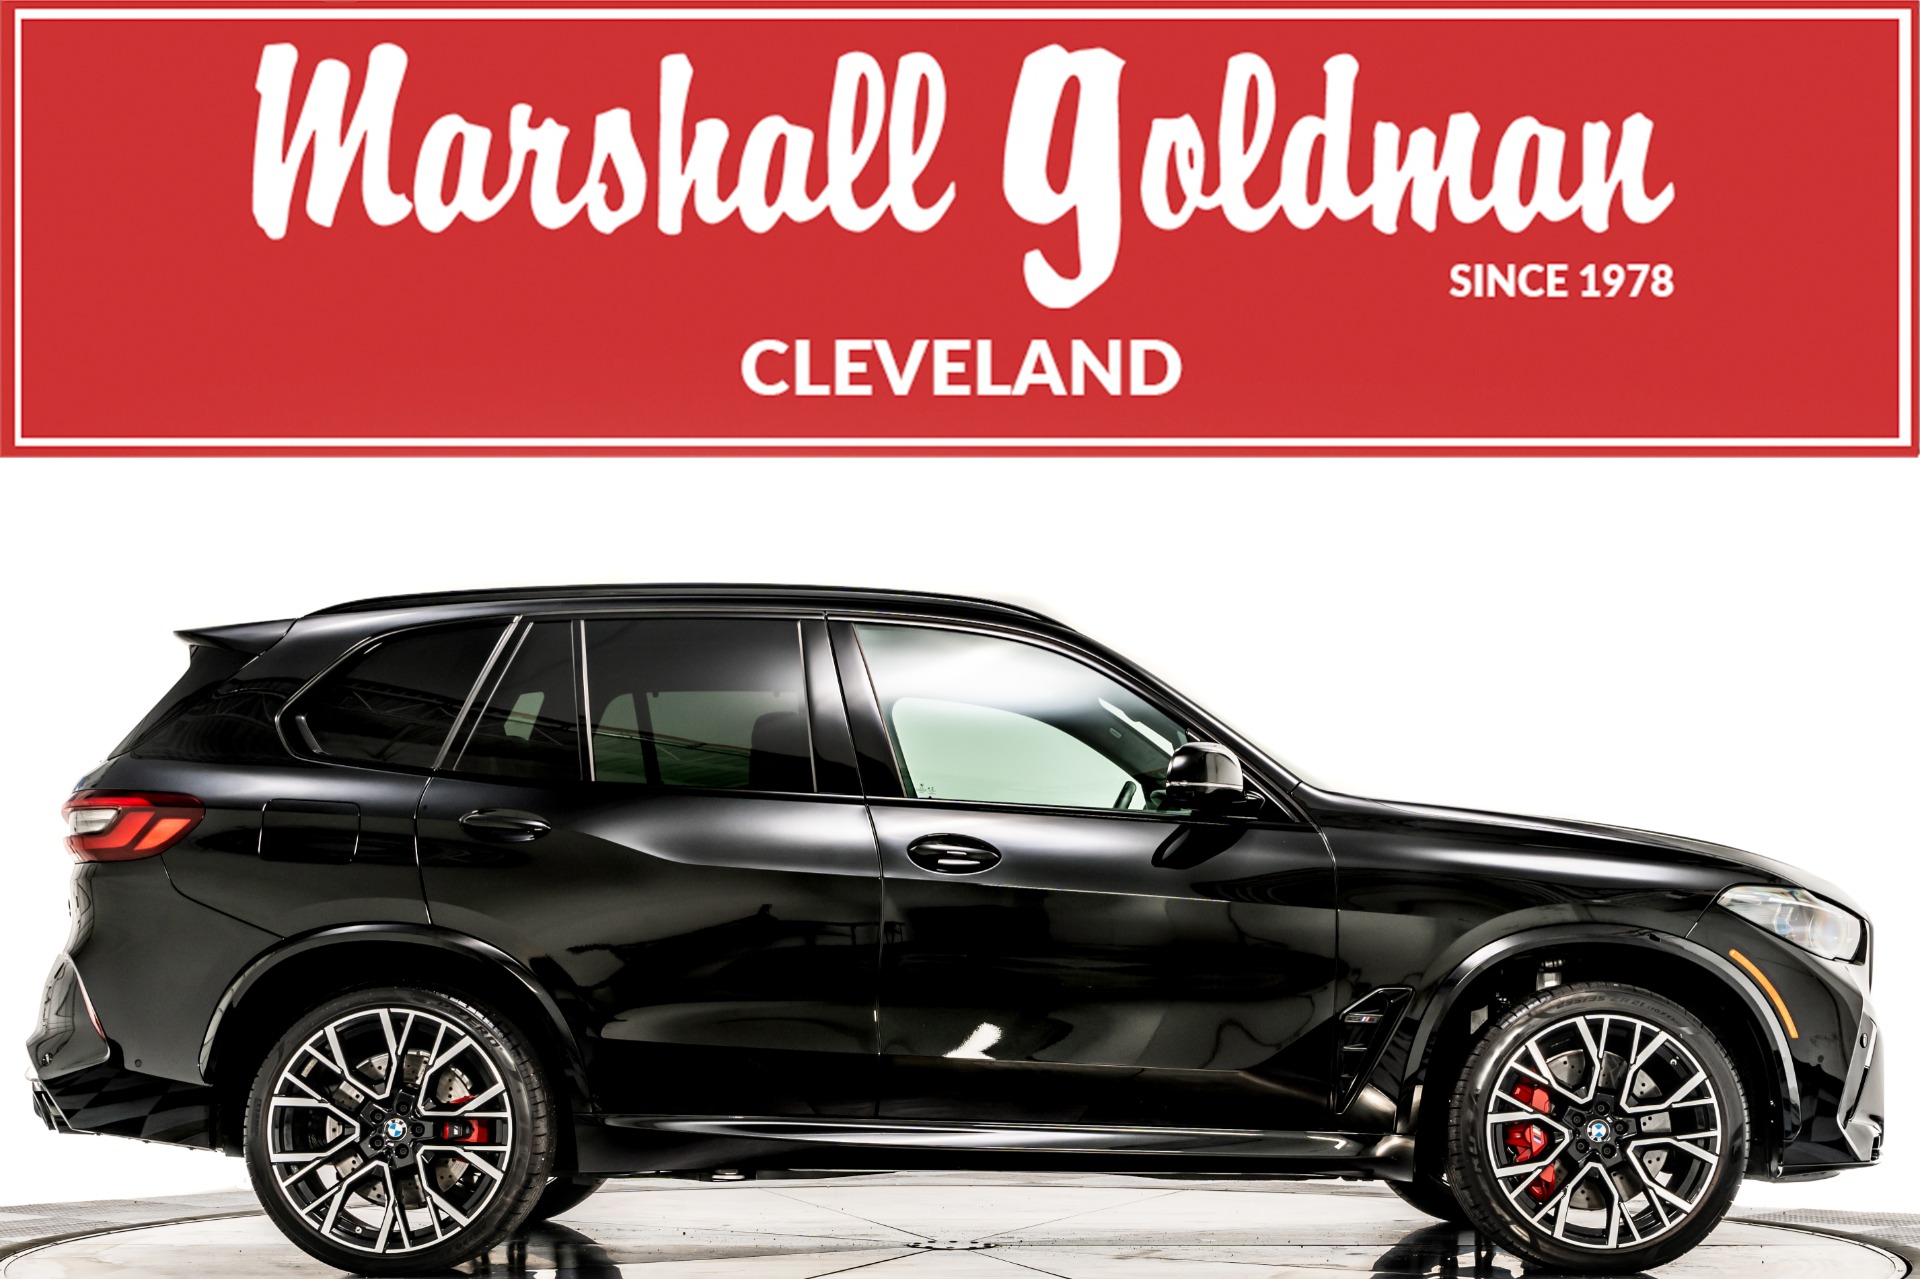 Used 2022 BMW X5M Competition For Sale ($115,900) | Marshall Goldman  Cleveland Stock #WX5MBD